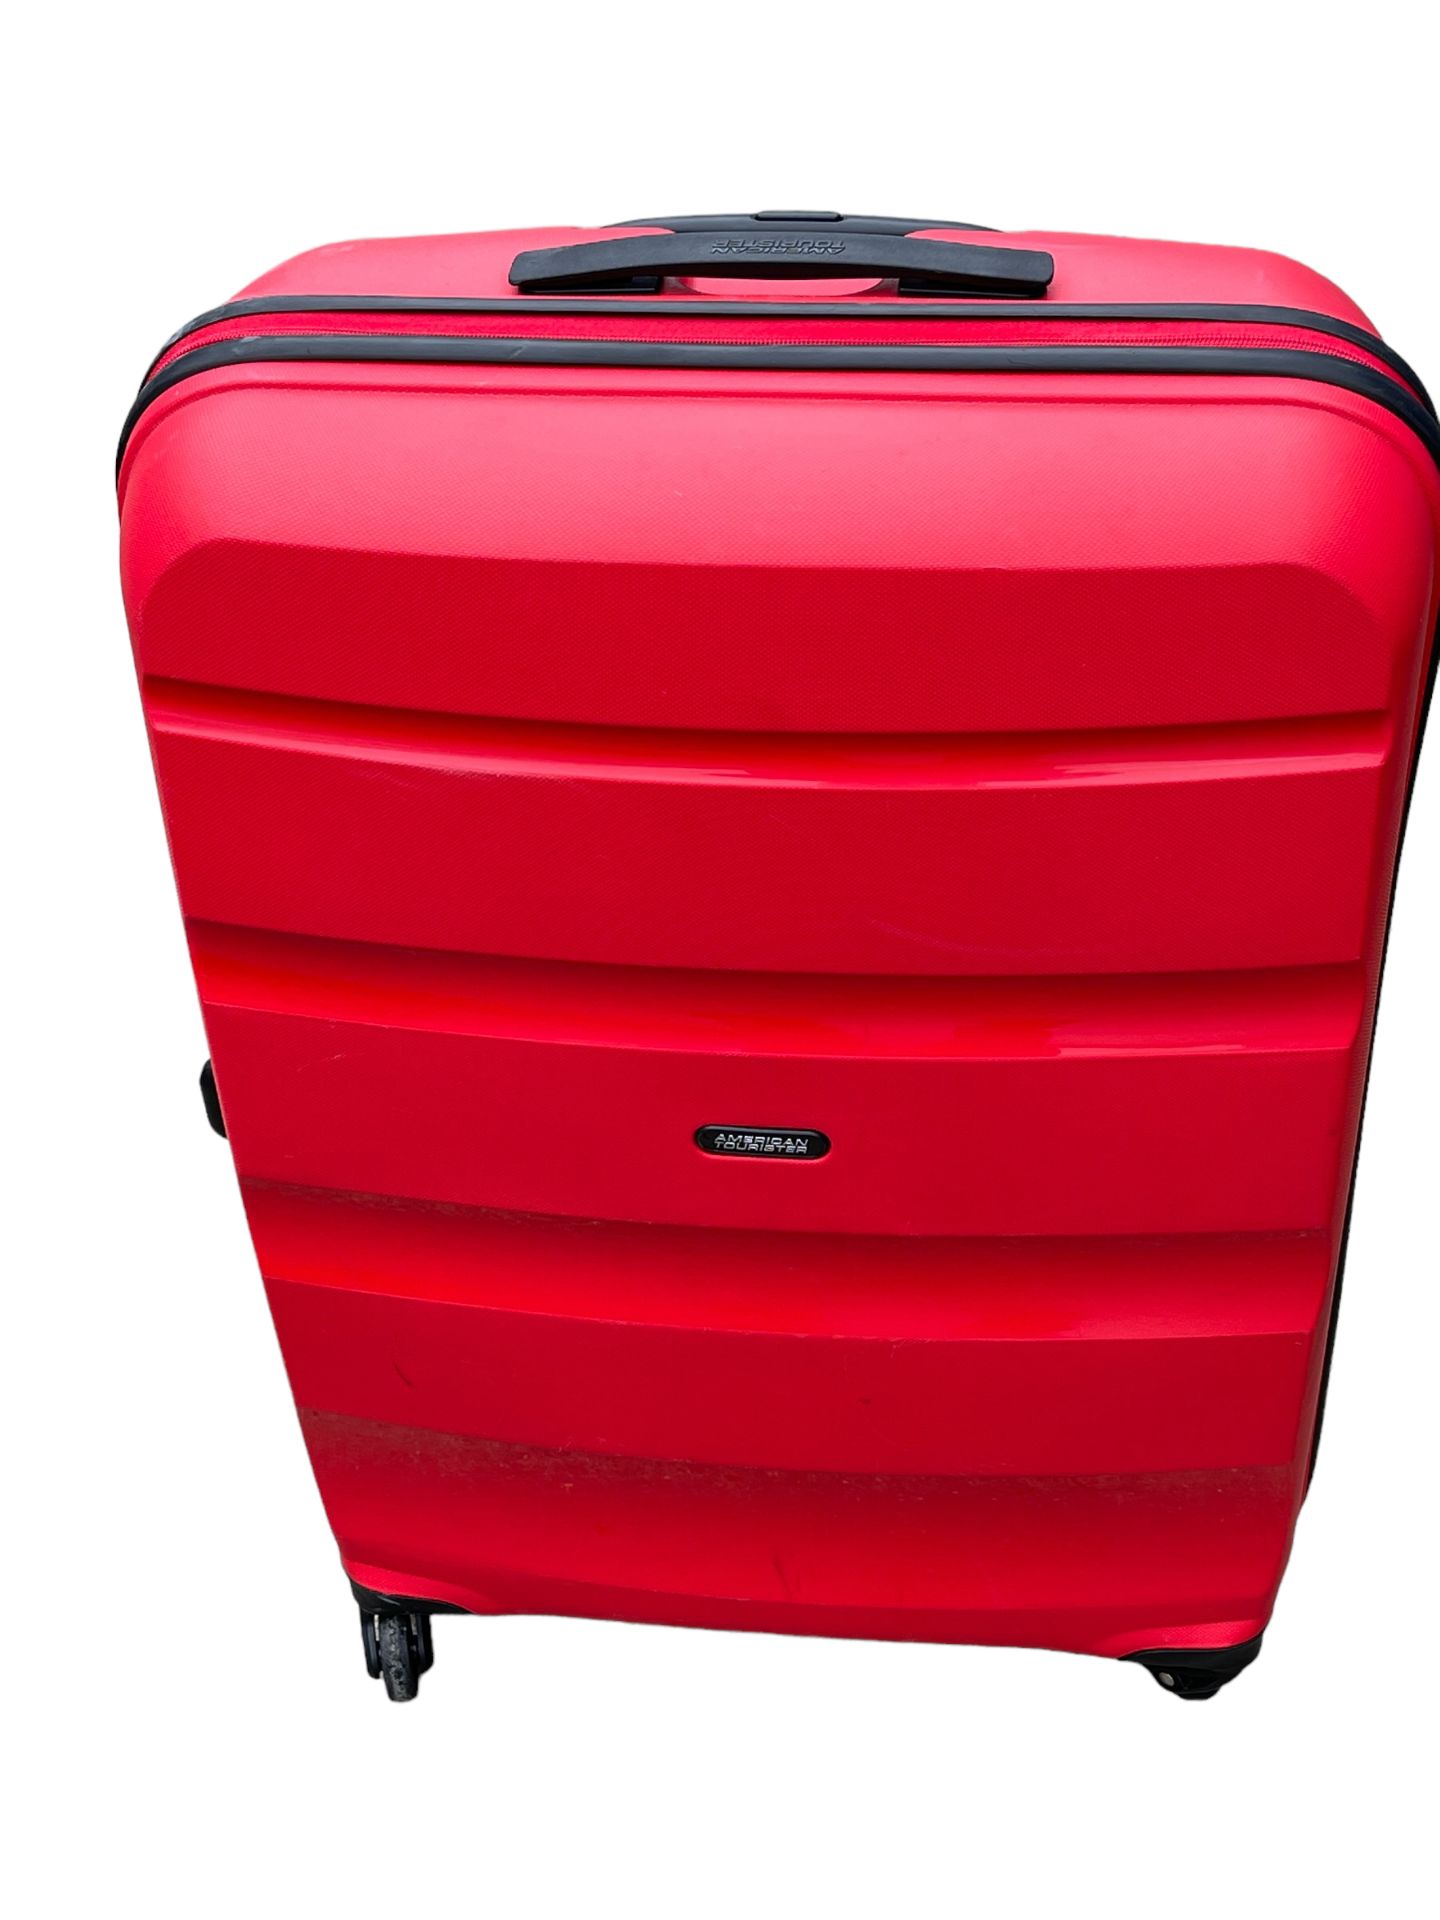 Large Suitcase, Unclaimed Luggage from our Private Jet Charter